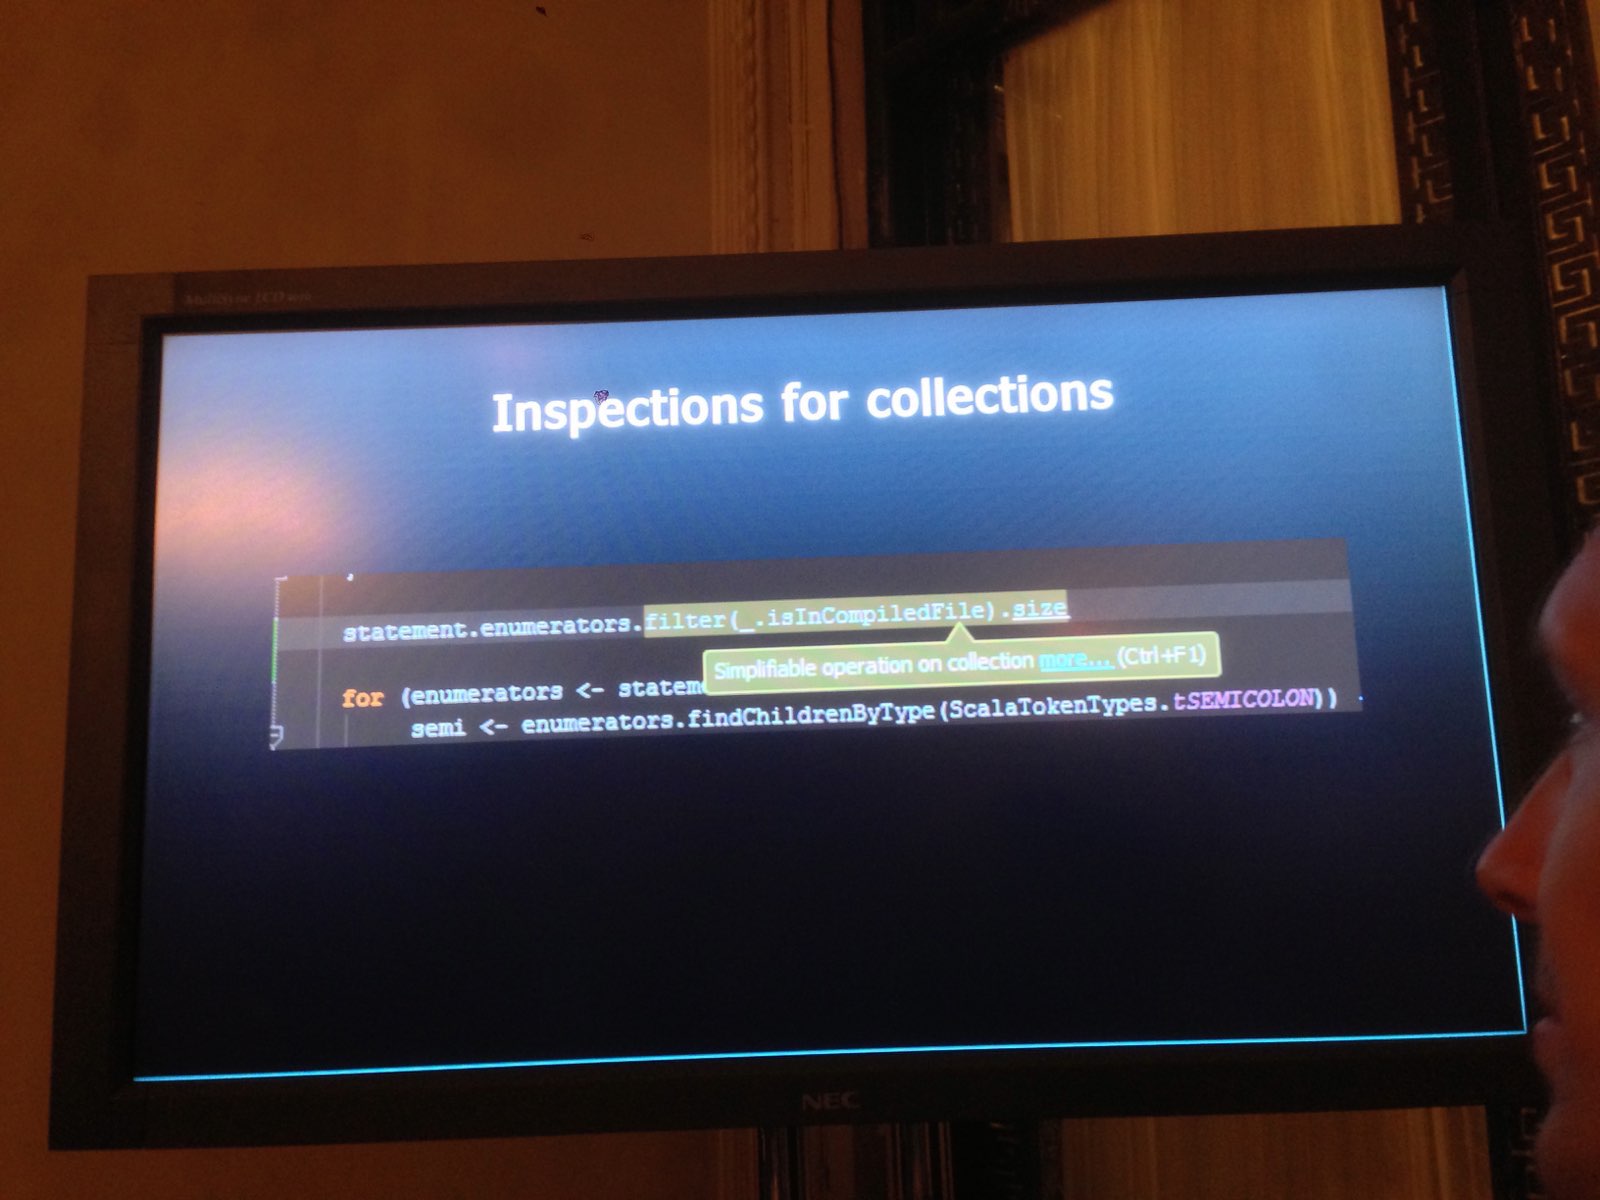 Inspections for collections